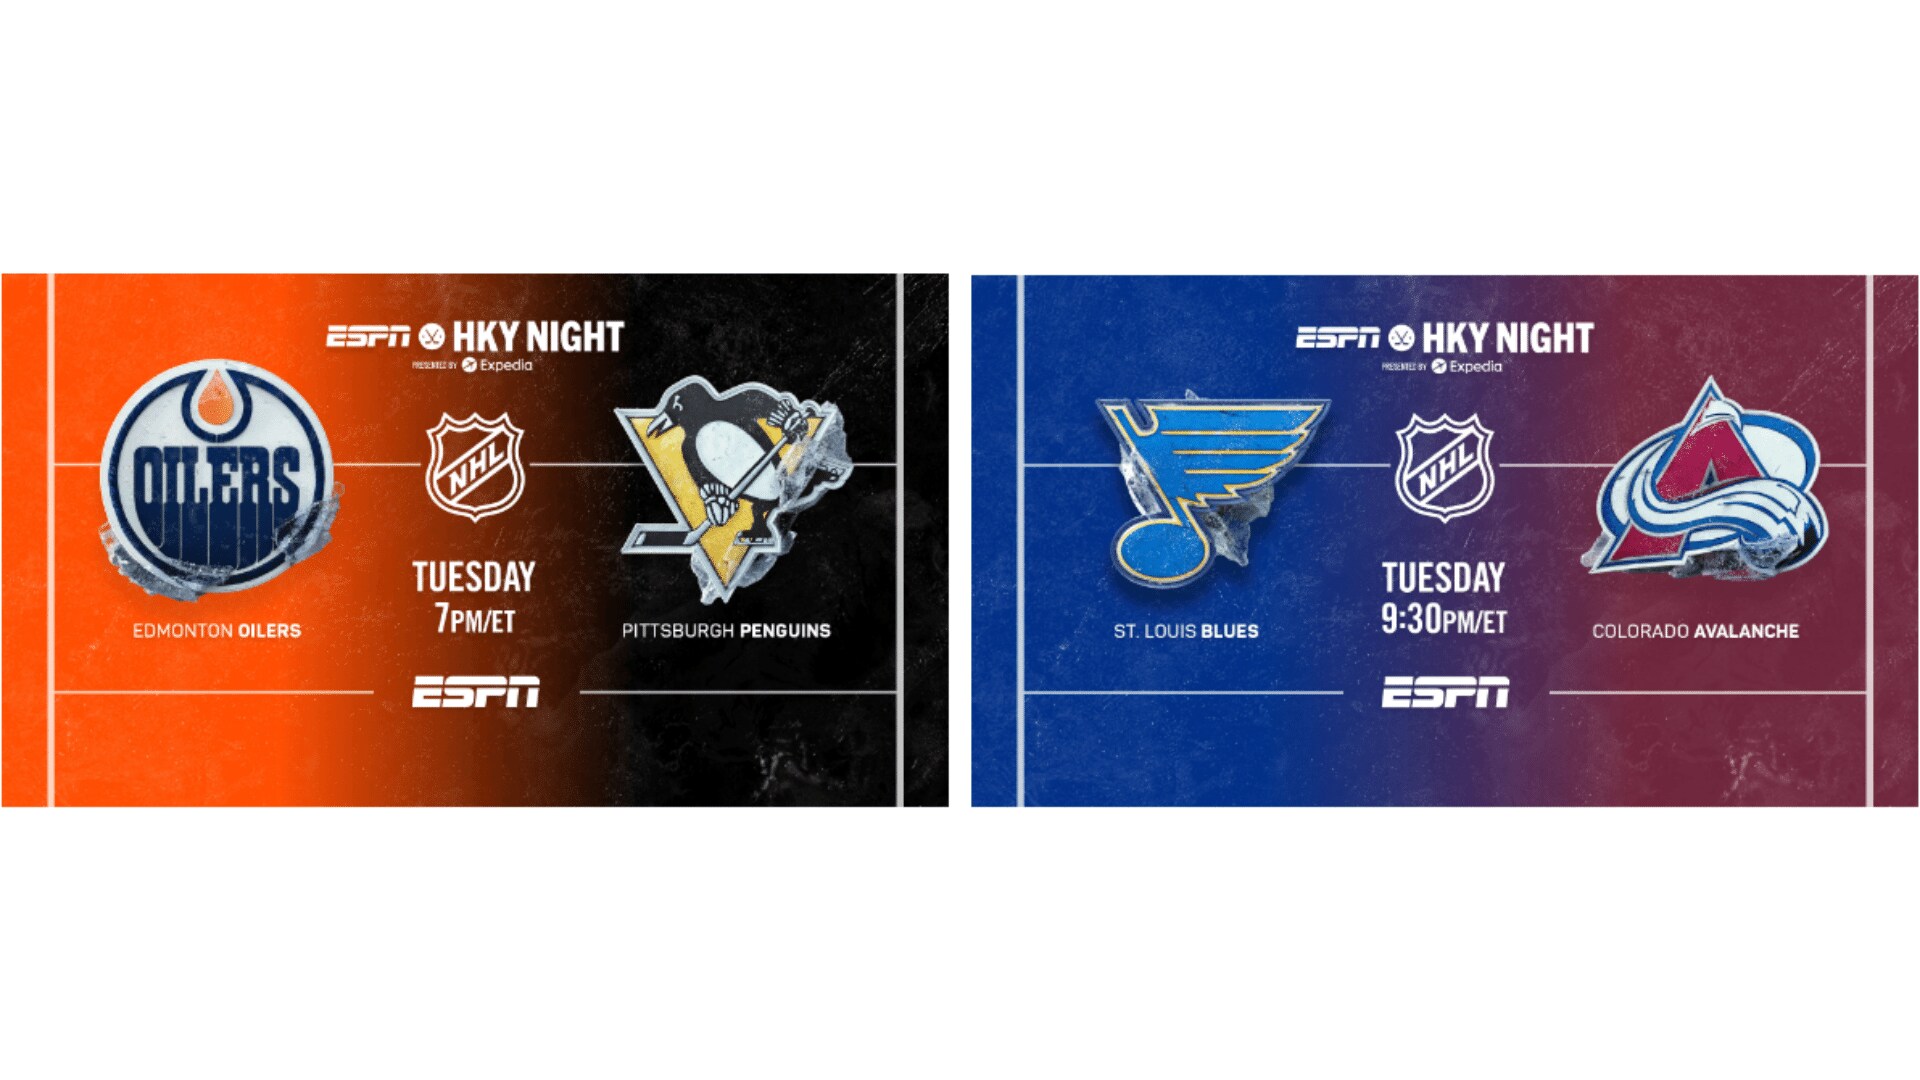 NHL Rush to the Playoffs Exclusively on ESPN, ESPN+ and Hulu:  Three National Hockey League Games Monday, Tuesday Night